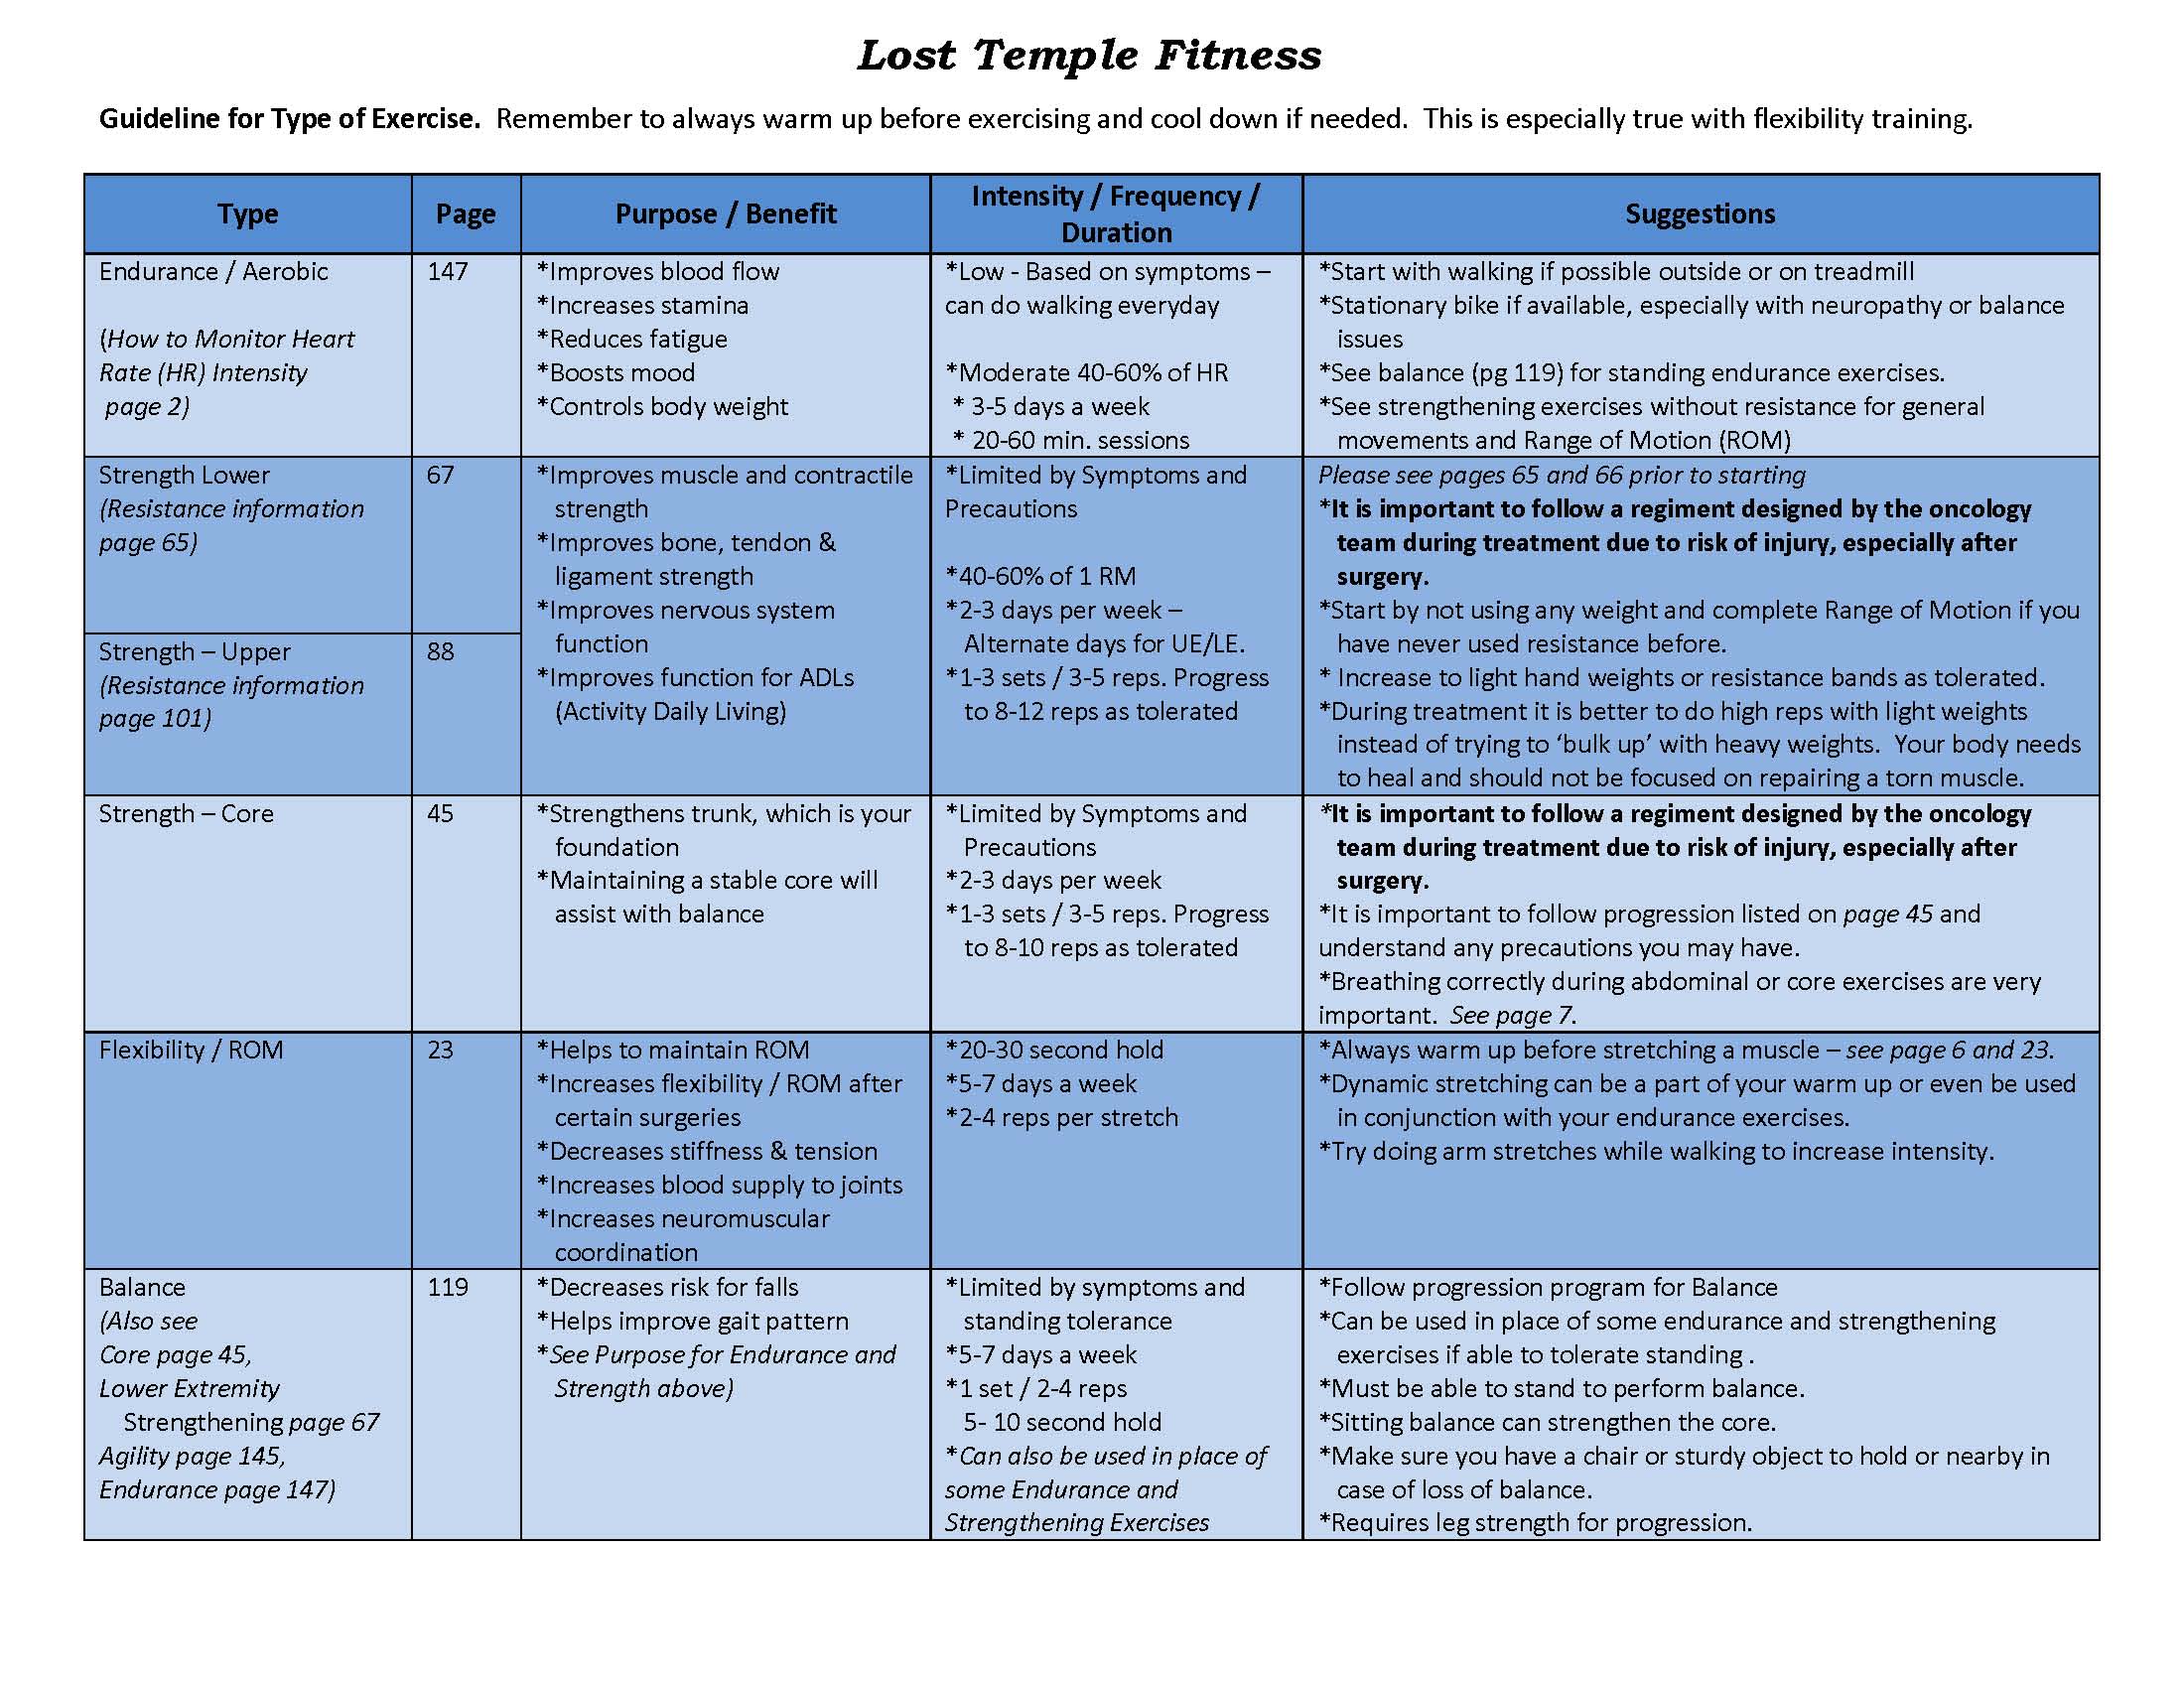 Exercise – Lost Temple Fitness & Cancer